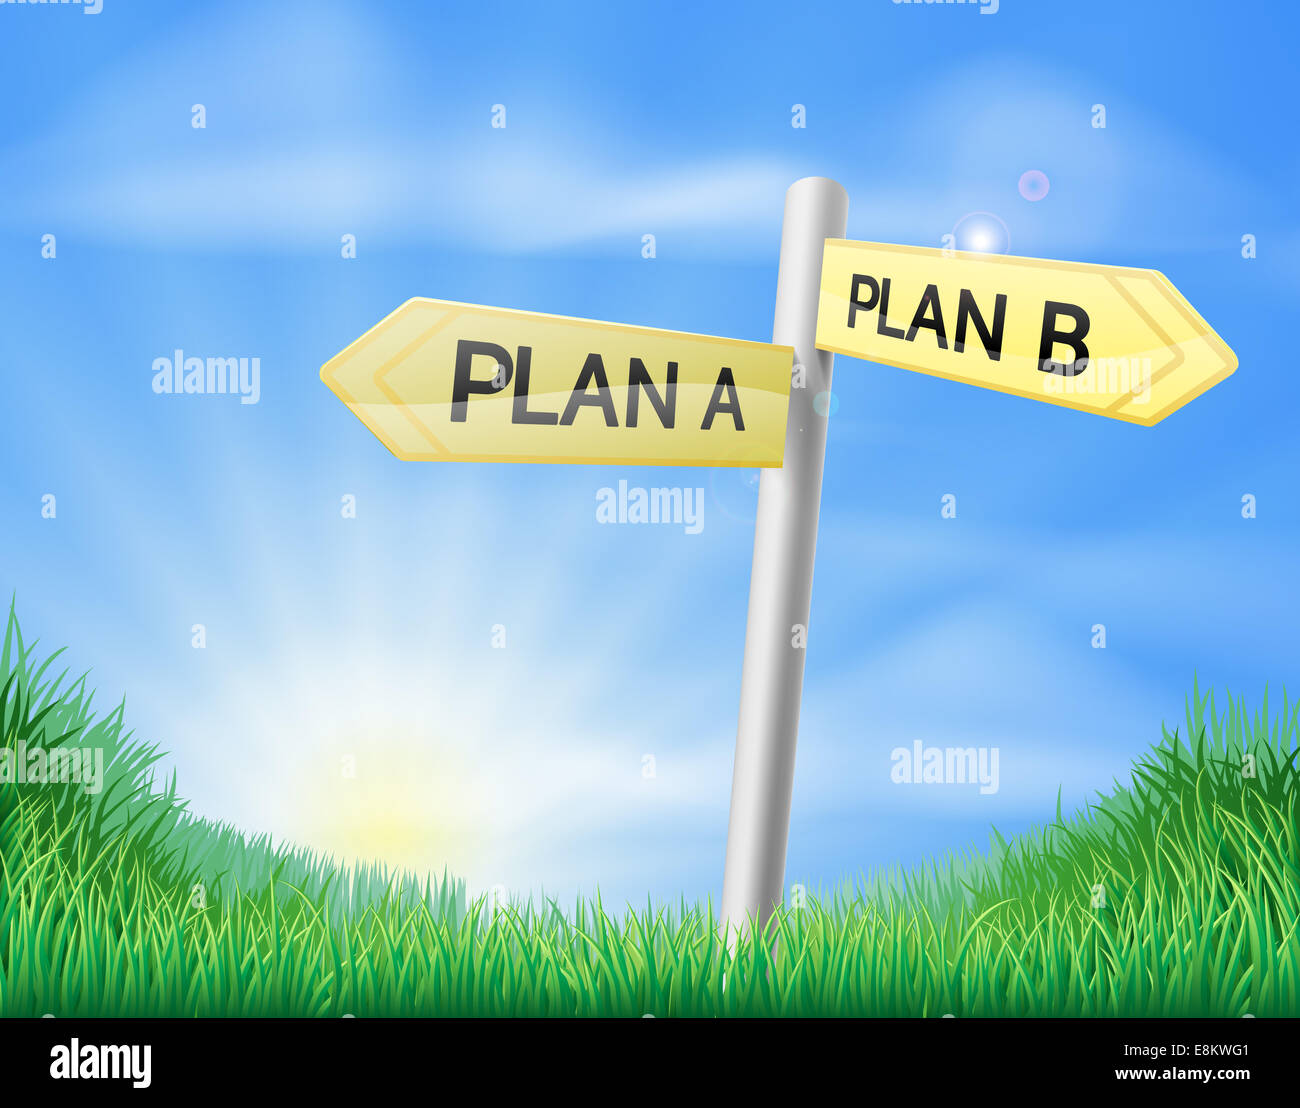 Plan A plan B sign in a sunny green field of lush grass Stock Photo